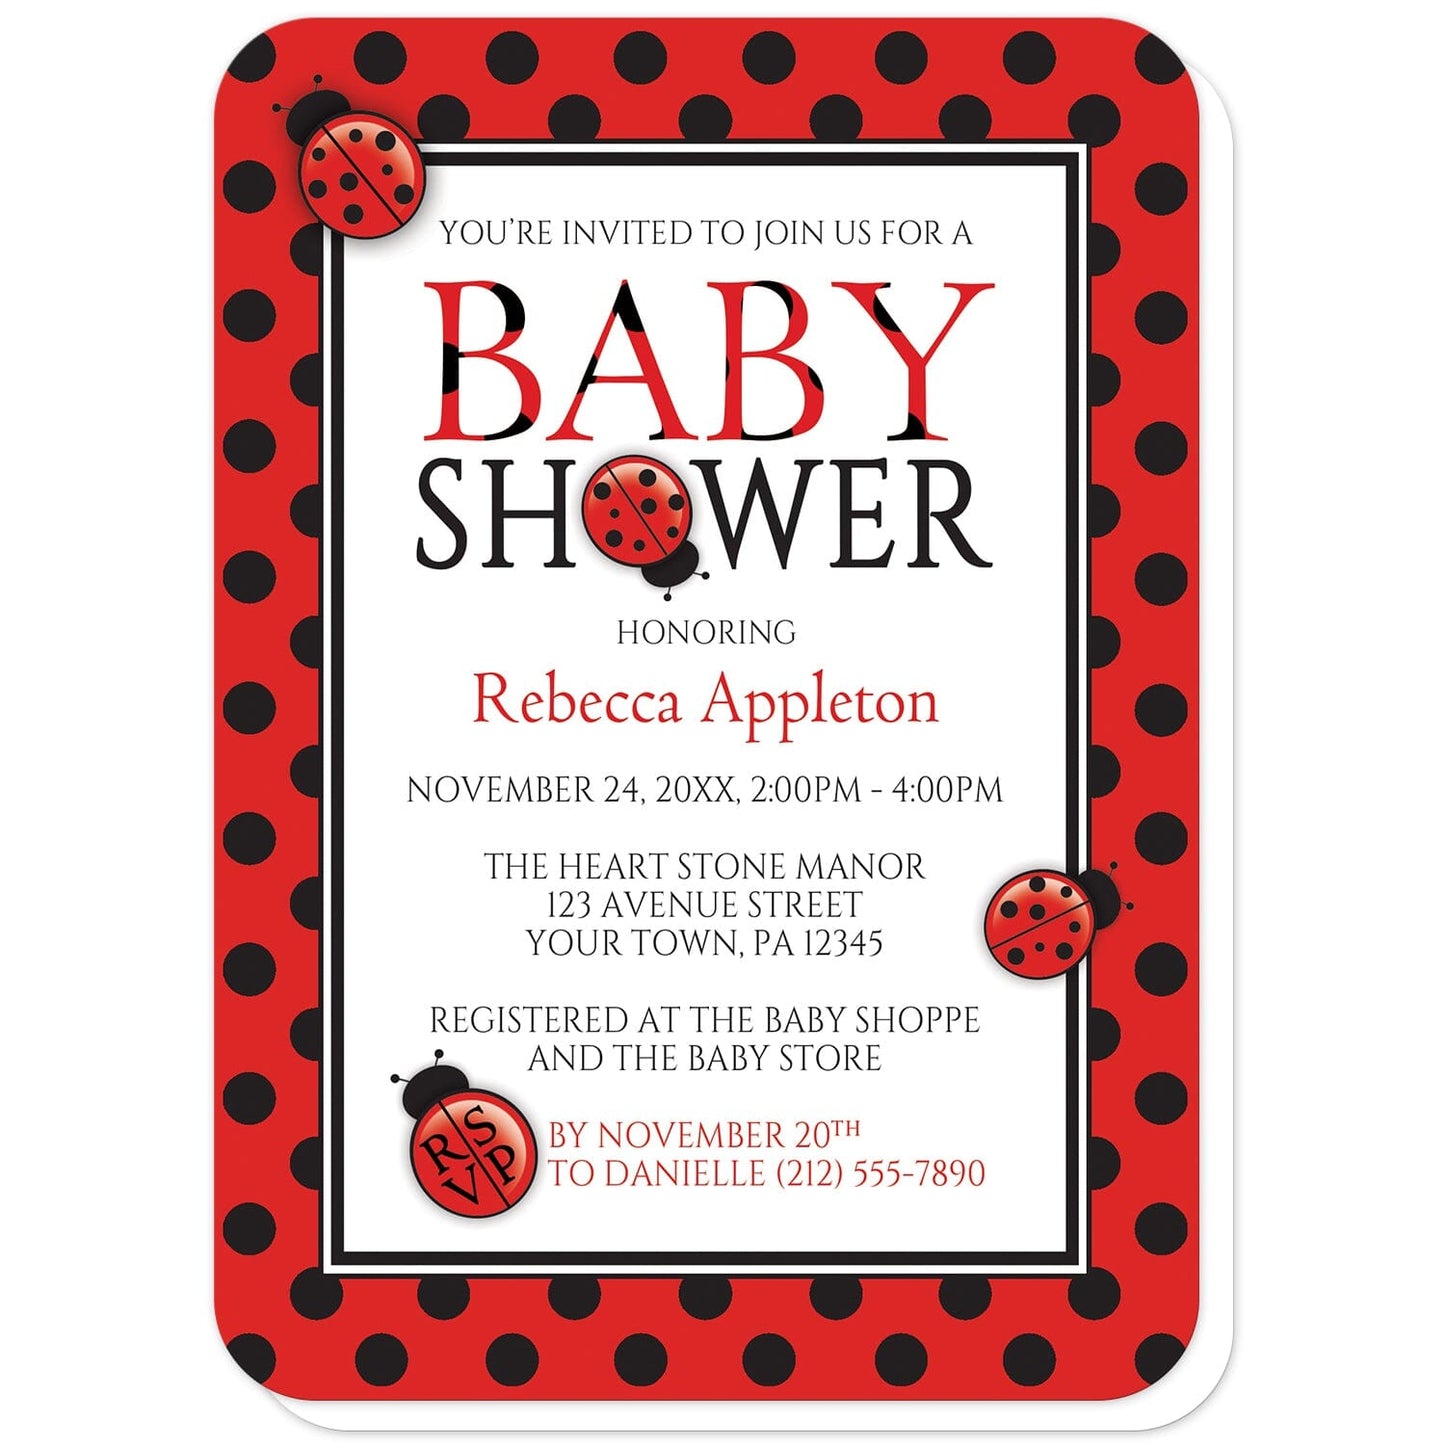 Polka Dot Red and Black Ladybug Baby Shower Invitations (with rounded corners) at Artistically Invited. Polka dot red and black ladybug baby shower invitations that are illustrated with cute ladybugs and a red and black polka dot pattern. The information you provide for your baby shower will be custom printed in red and black over white in the center. 